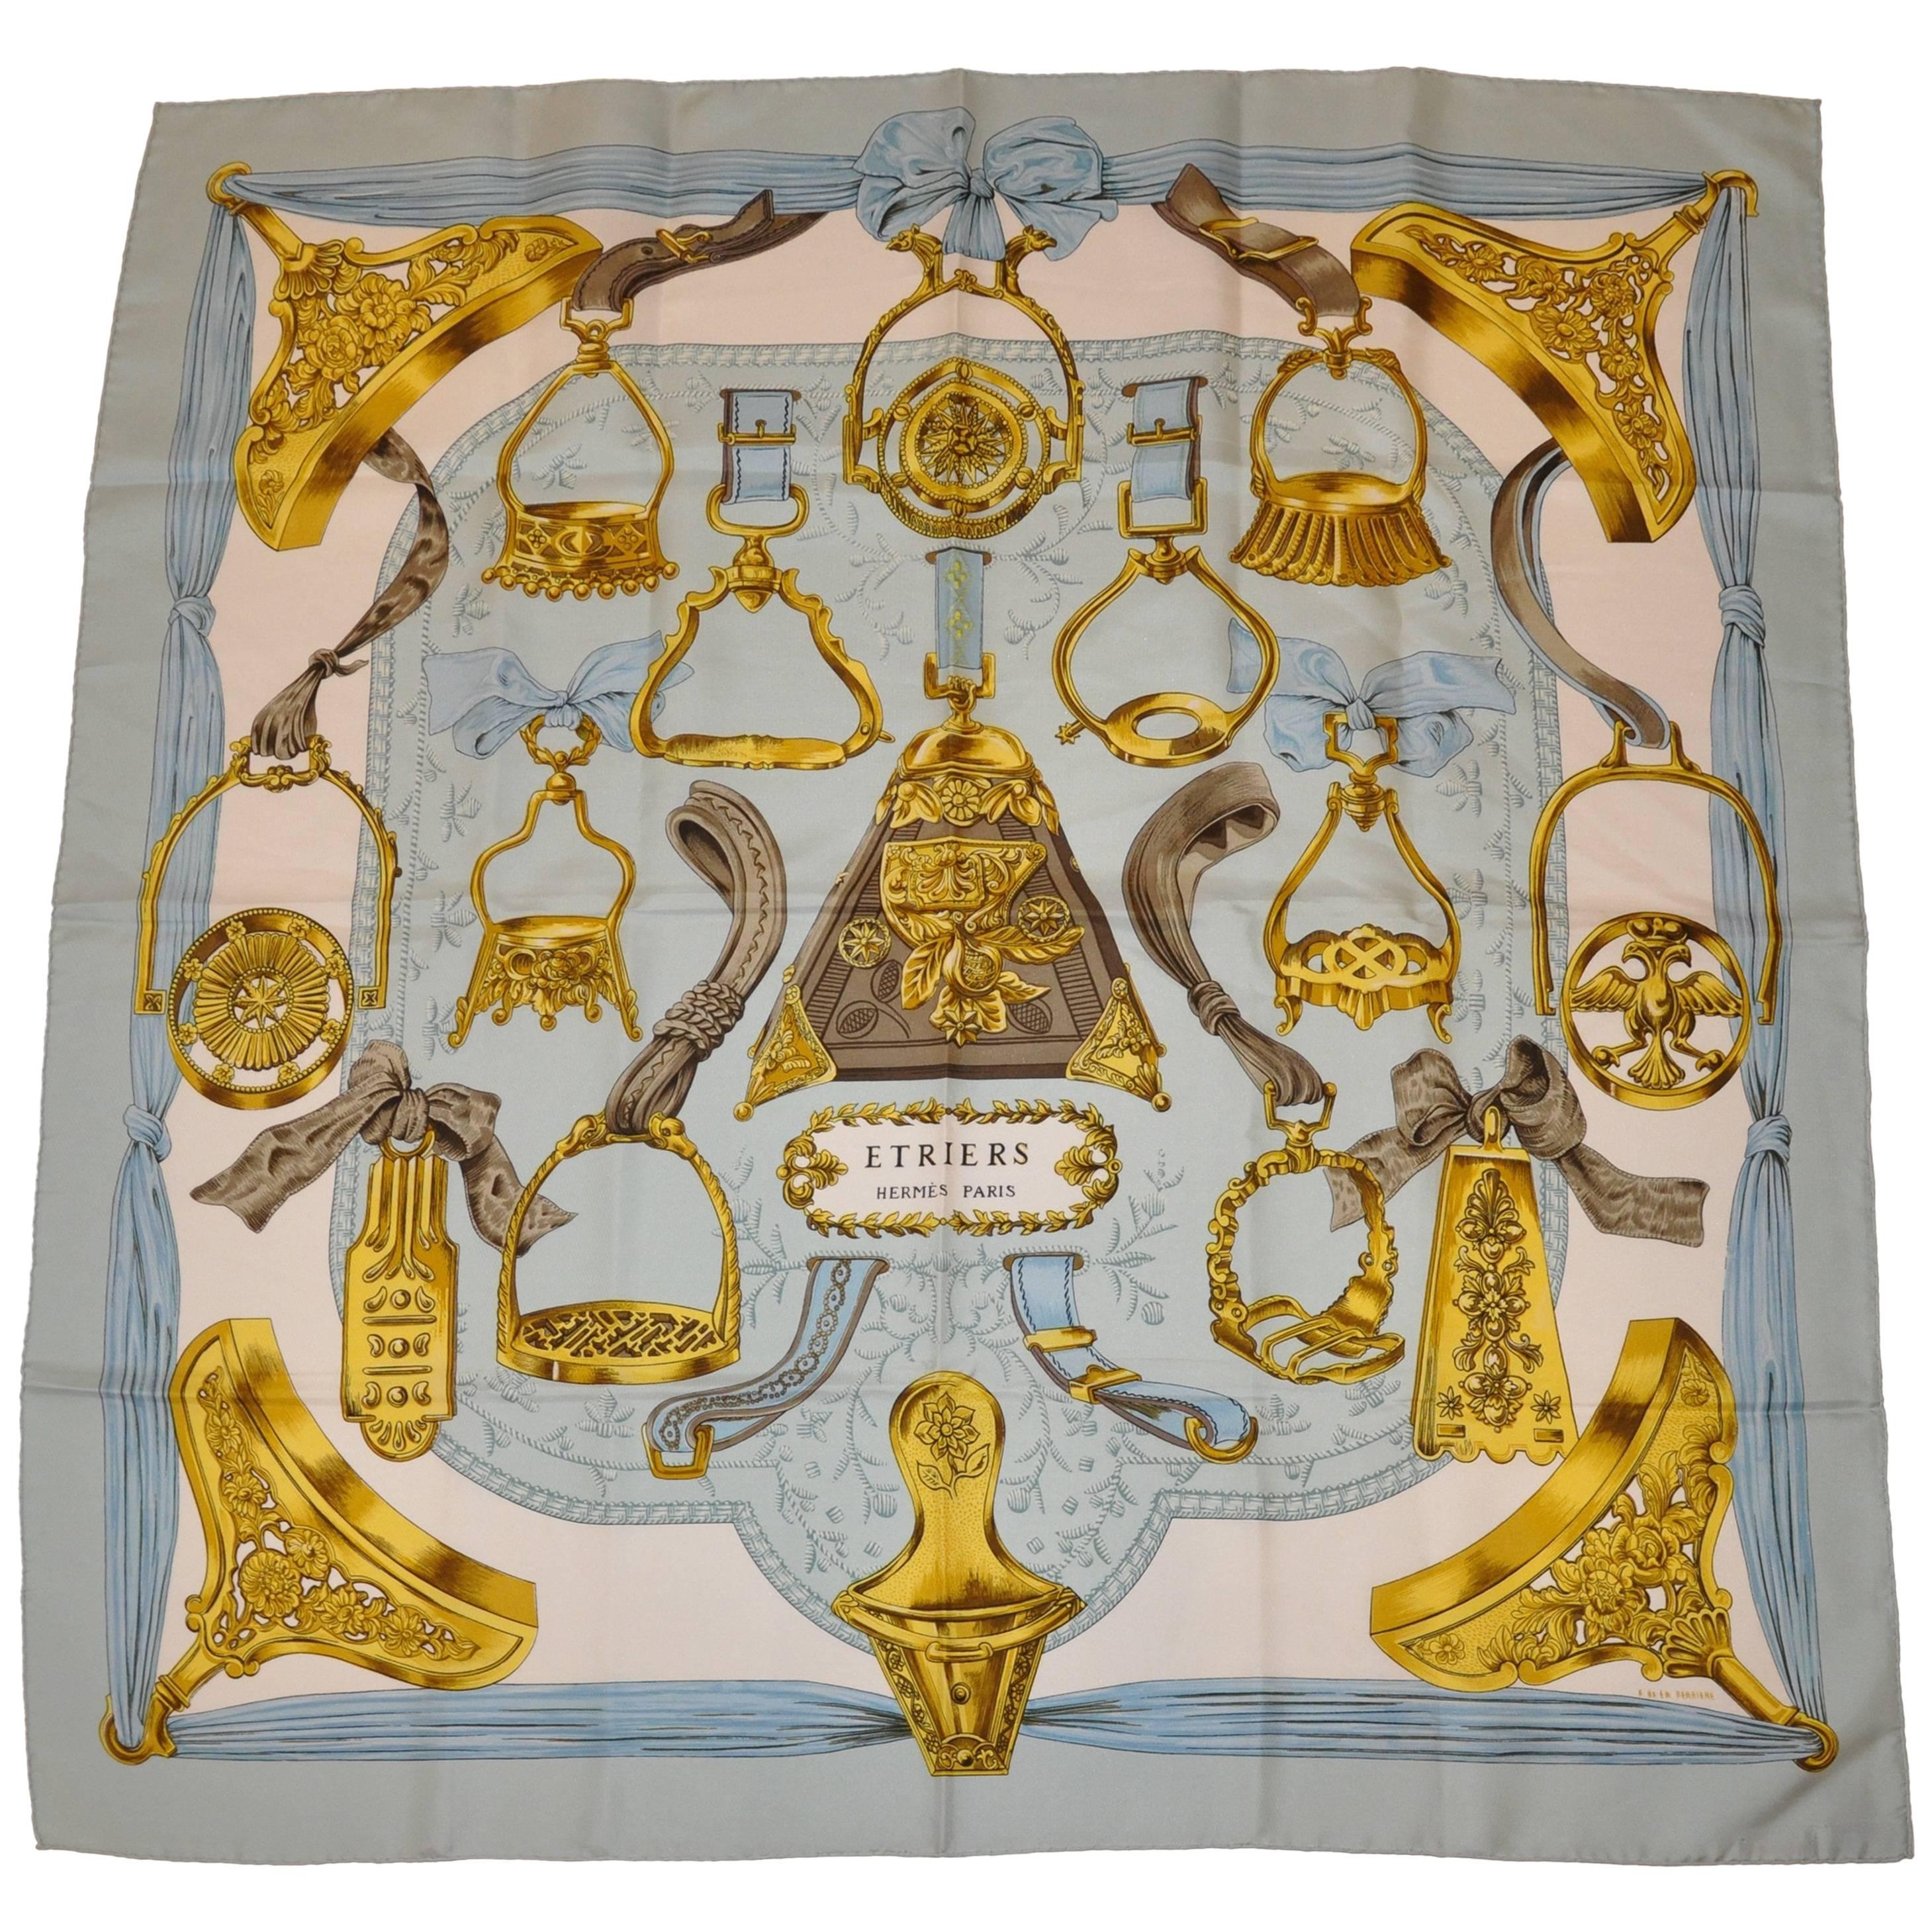 Hermes De La Perriere "Imperial Blue with Gold" Silk Jacquard Scarf